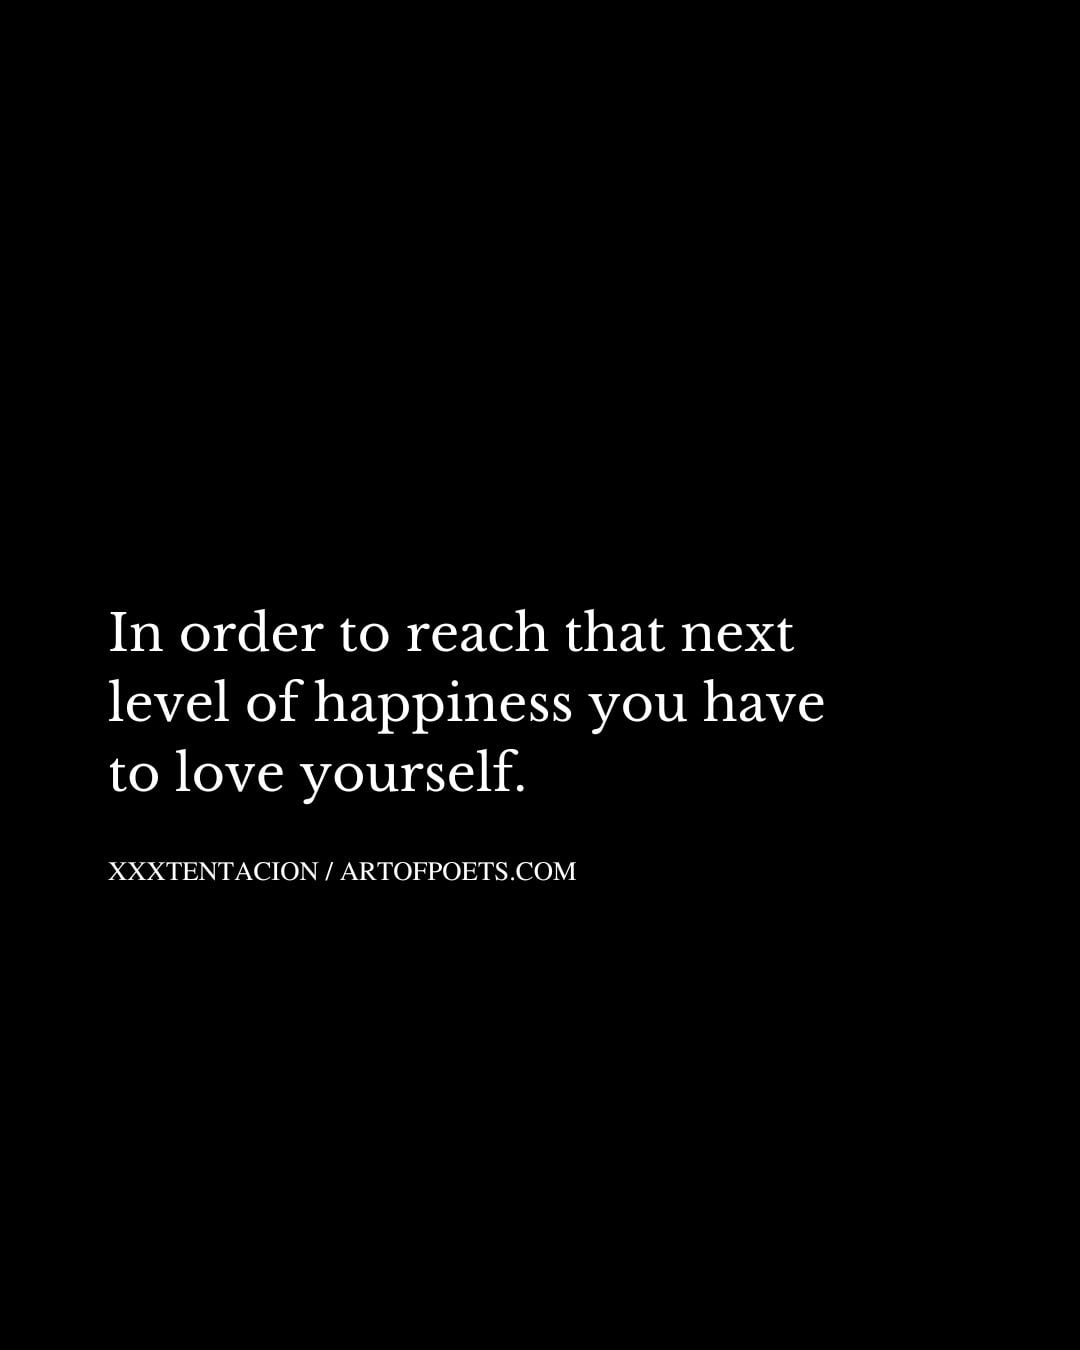 In order to reach that next level of happiness you have to love yourself